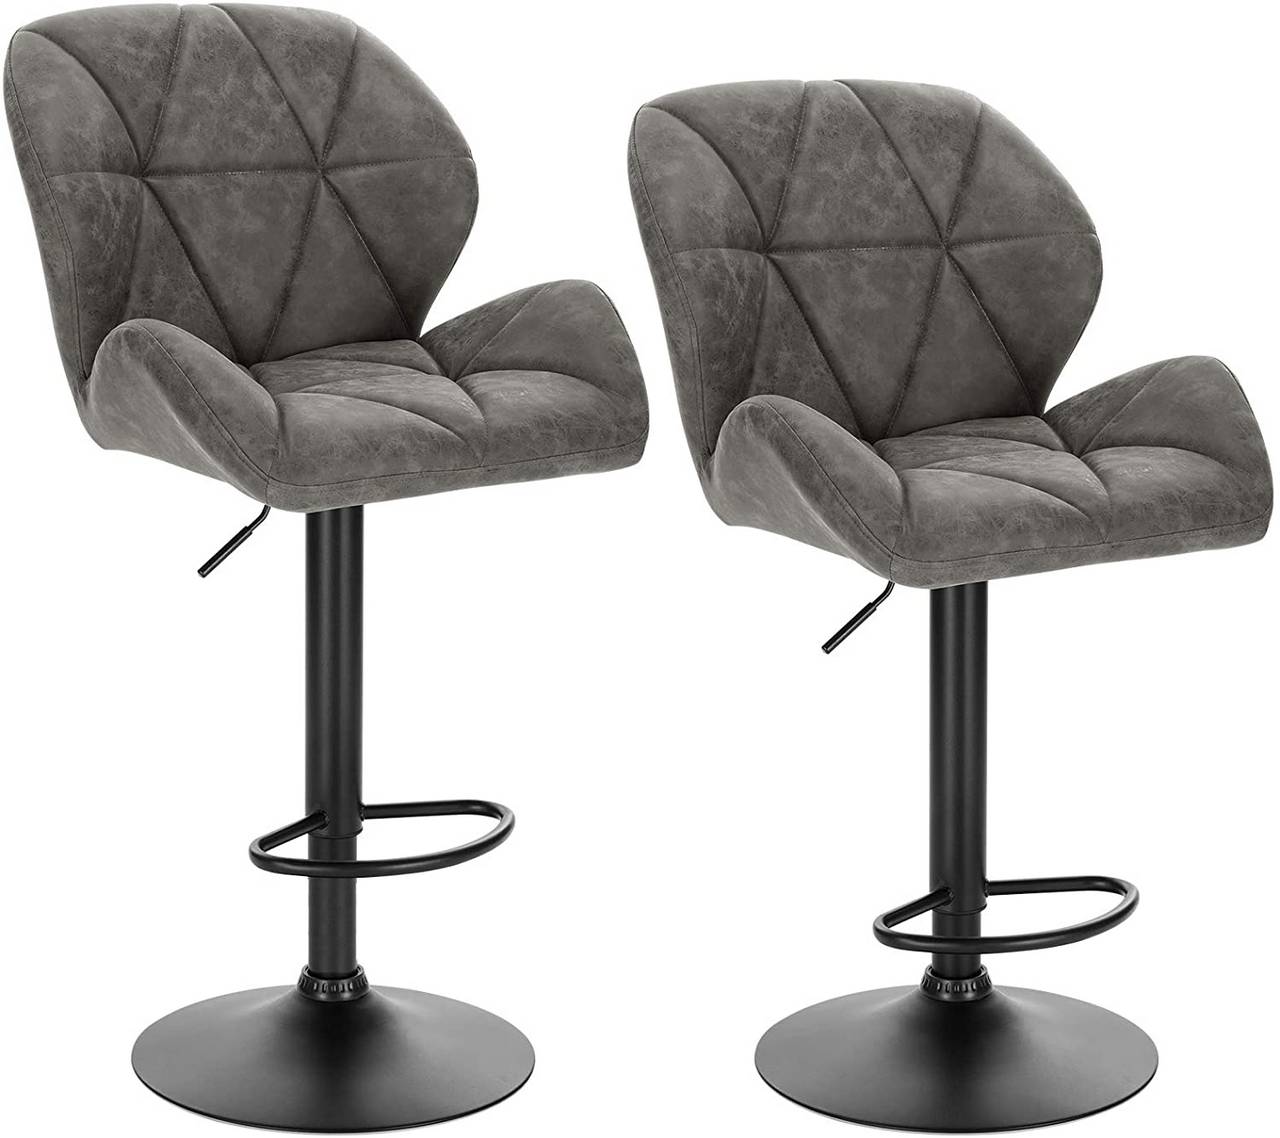 made stools, stools imitation with of Set backrest bar leather 2 of stools, bistro counter